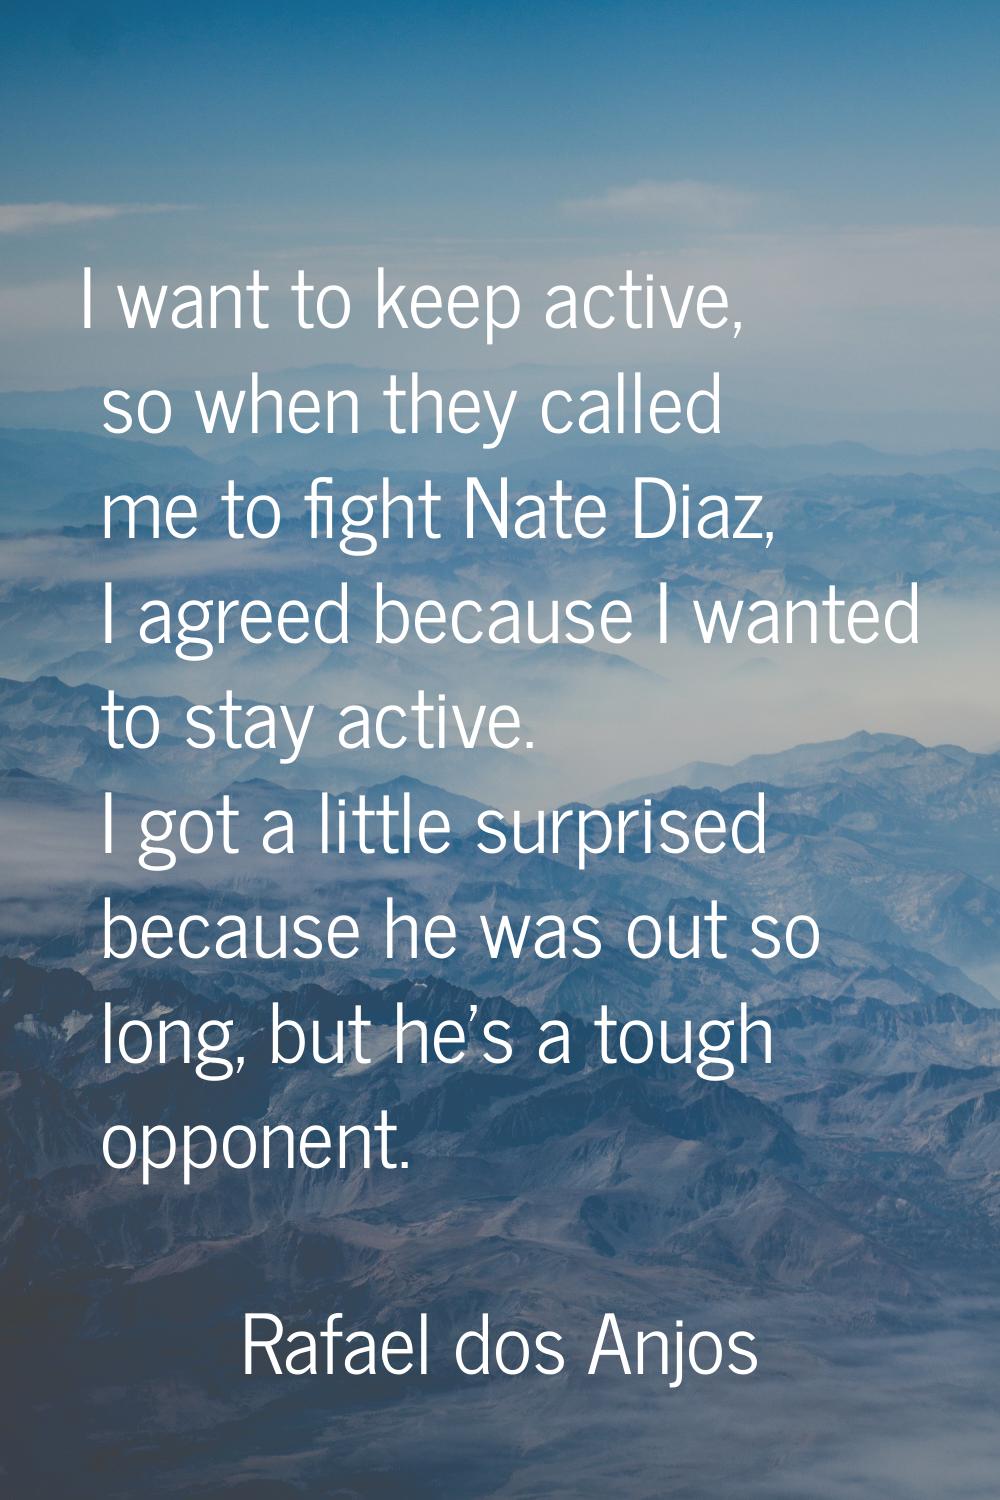 I want to keep active, so when they called me to fight Nate Diaz, I agreed because I wanted to stay